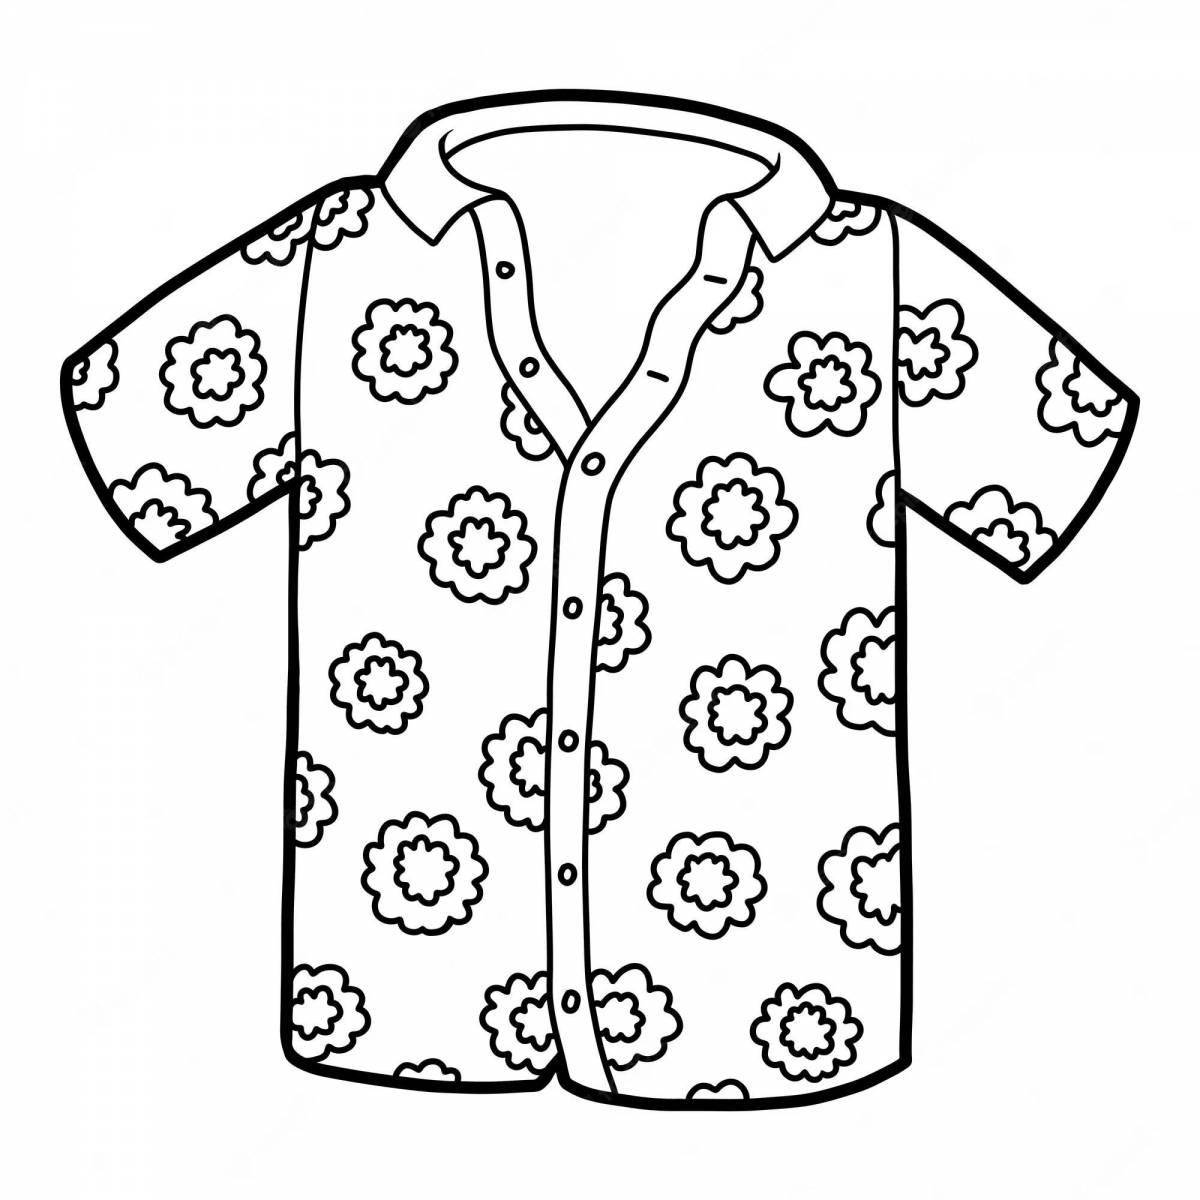 A fun coloring book with shirts for 2-3 year olds